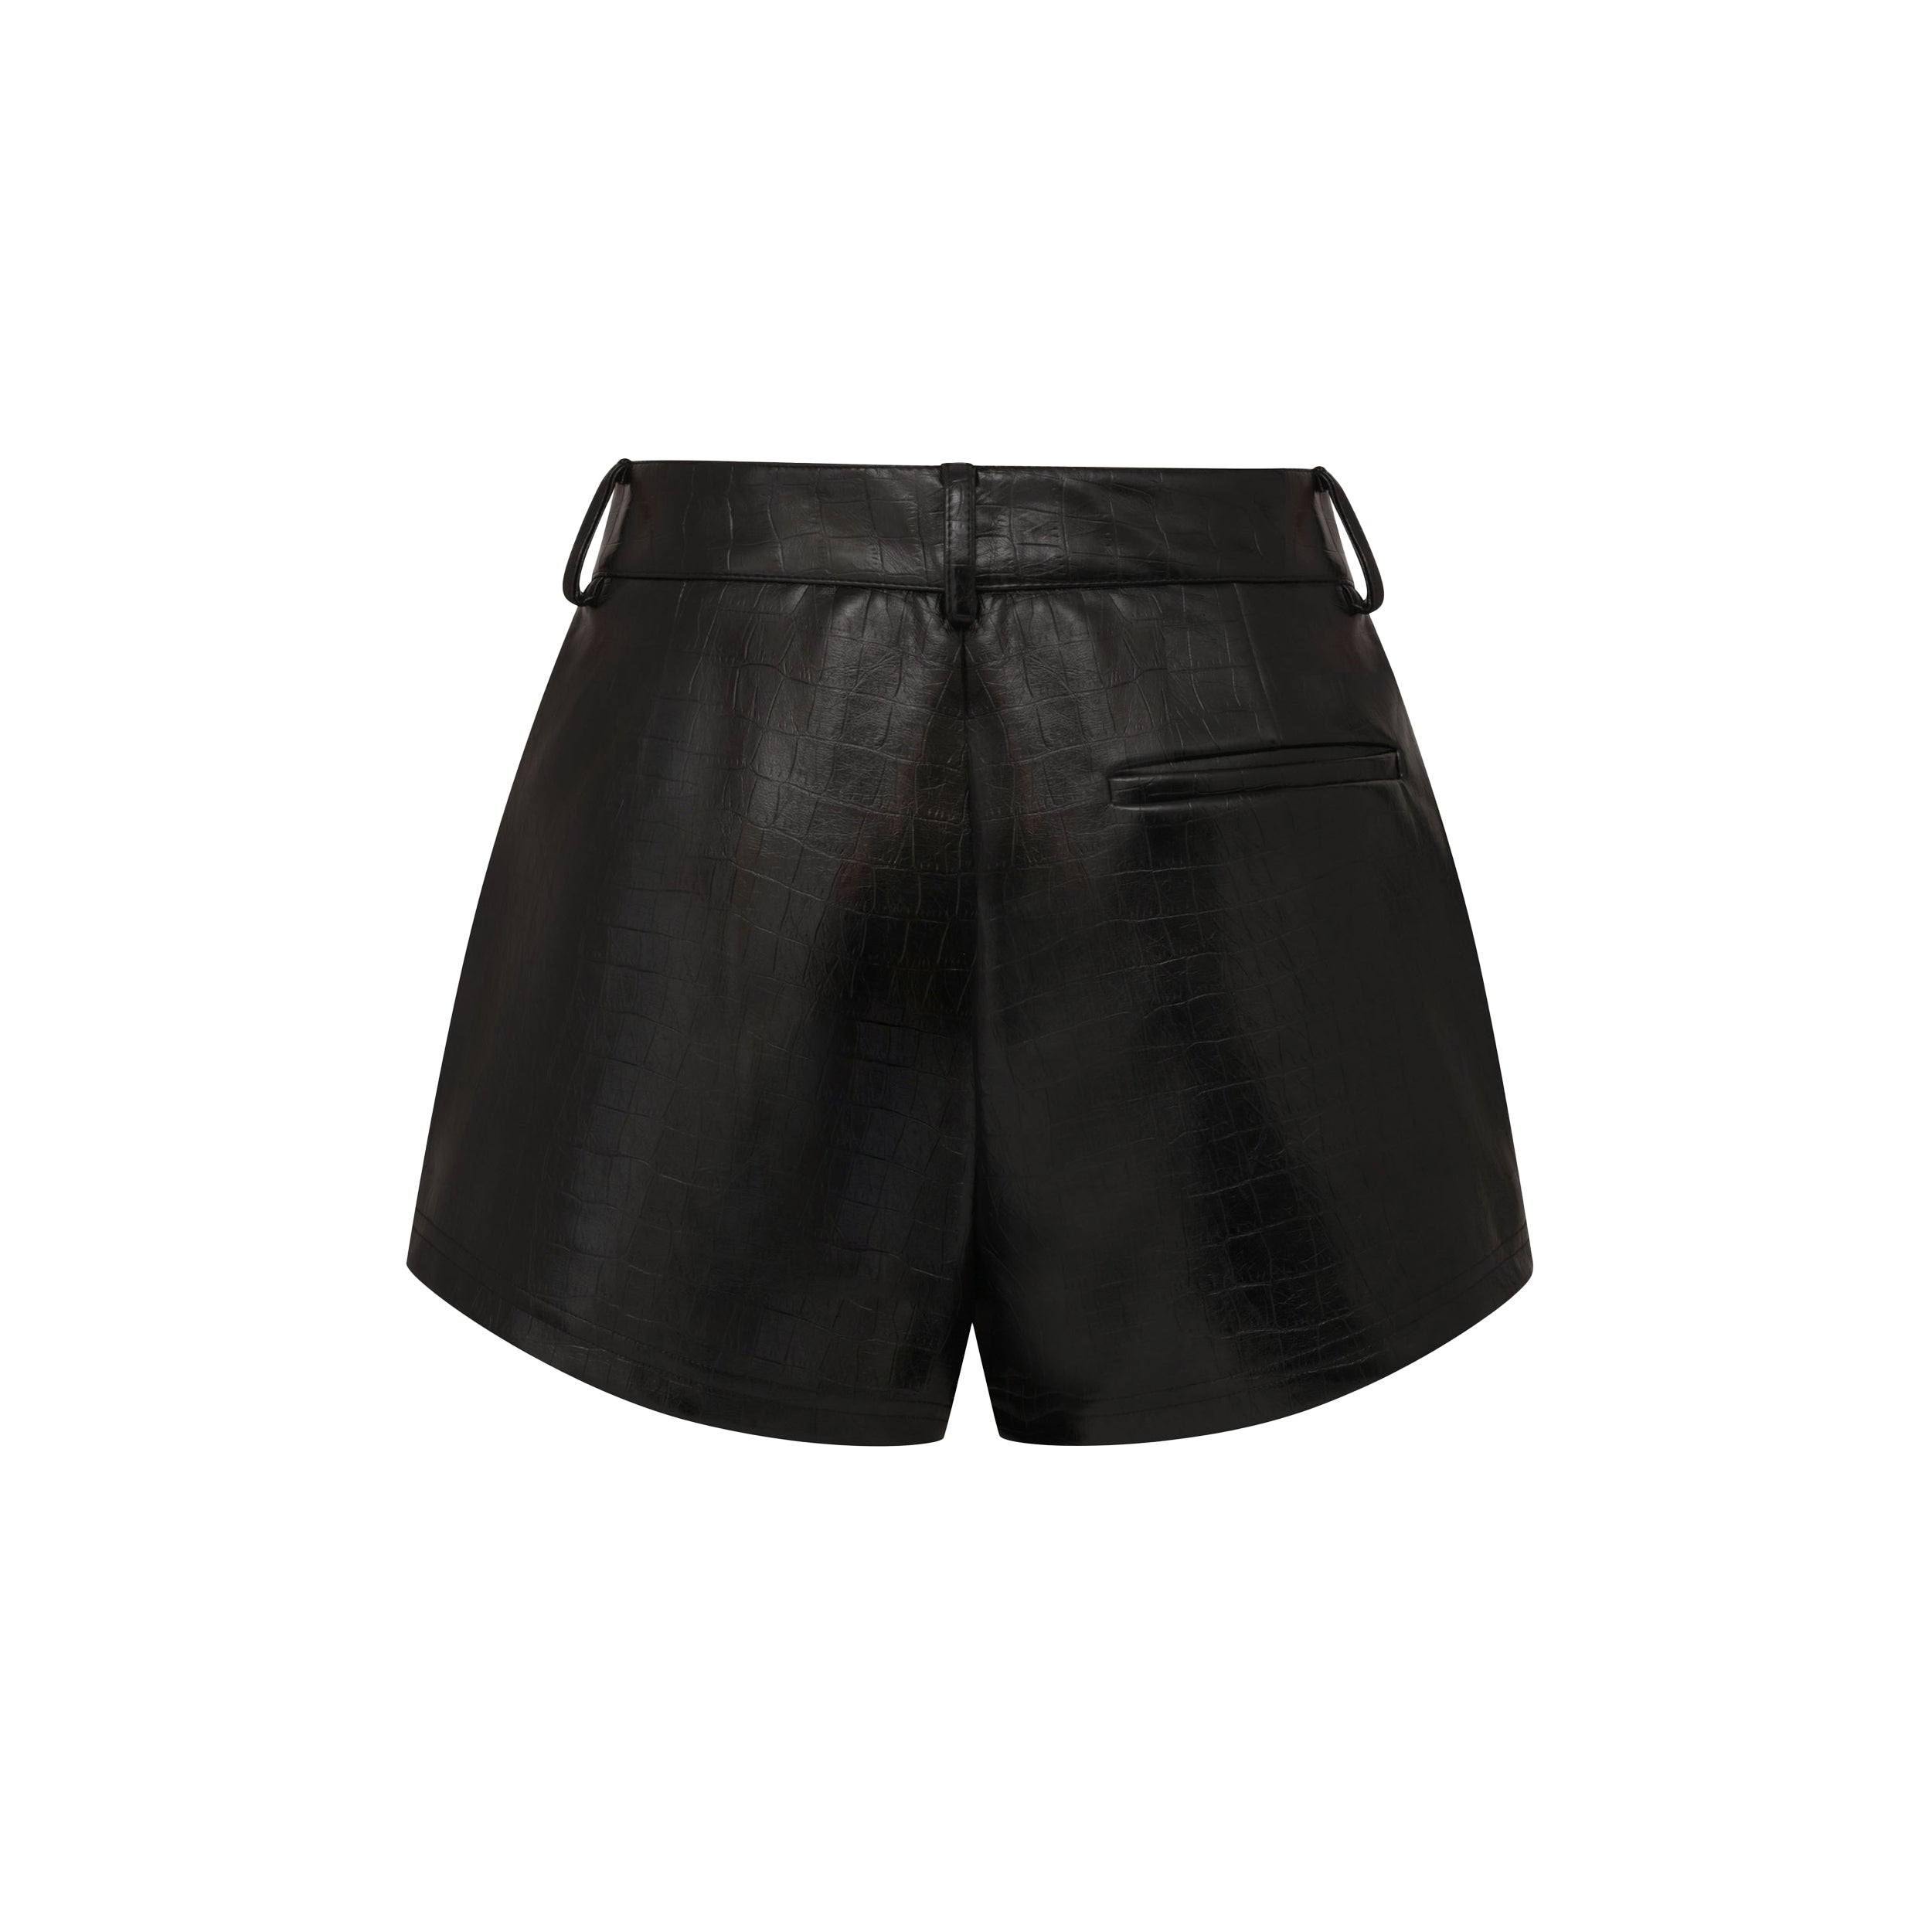 Rear view product shot of black faux leather short with croco embossed pattern.